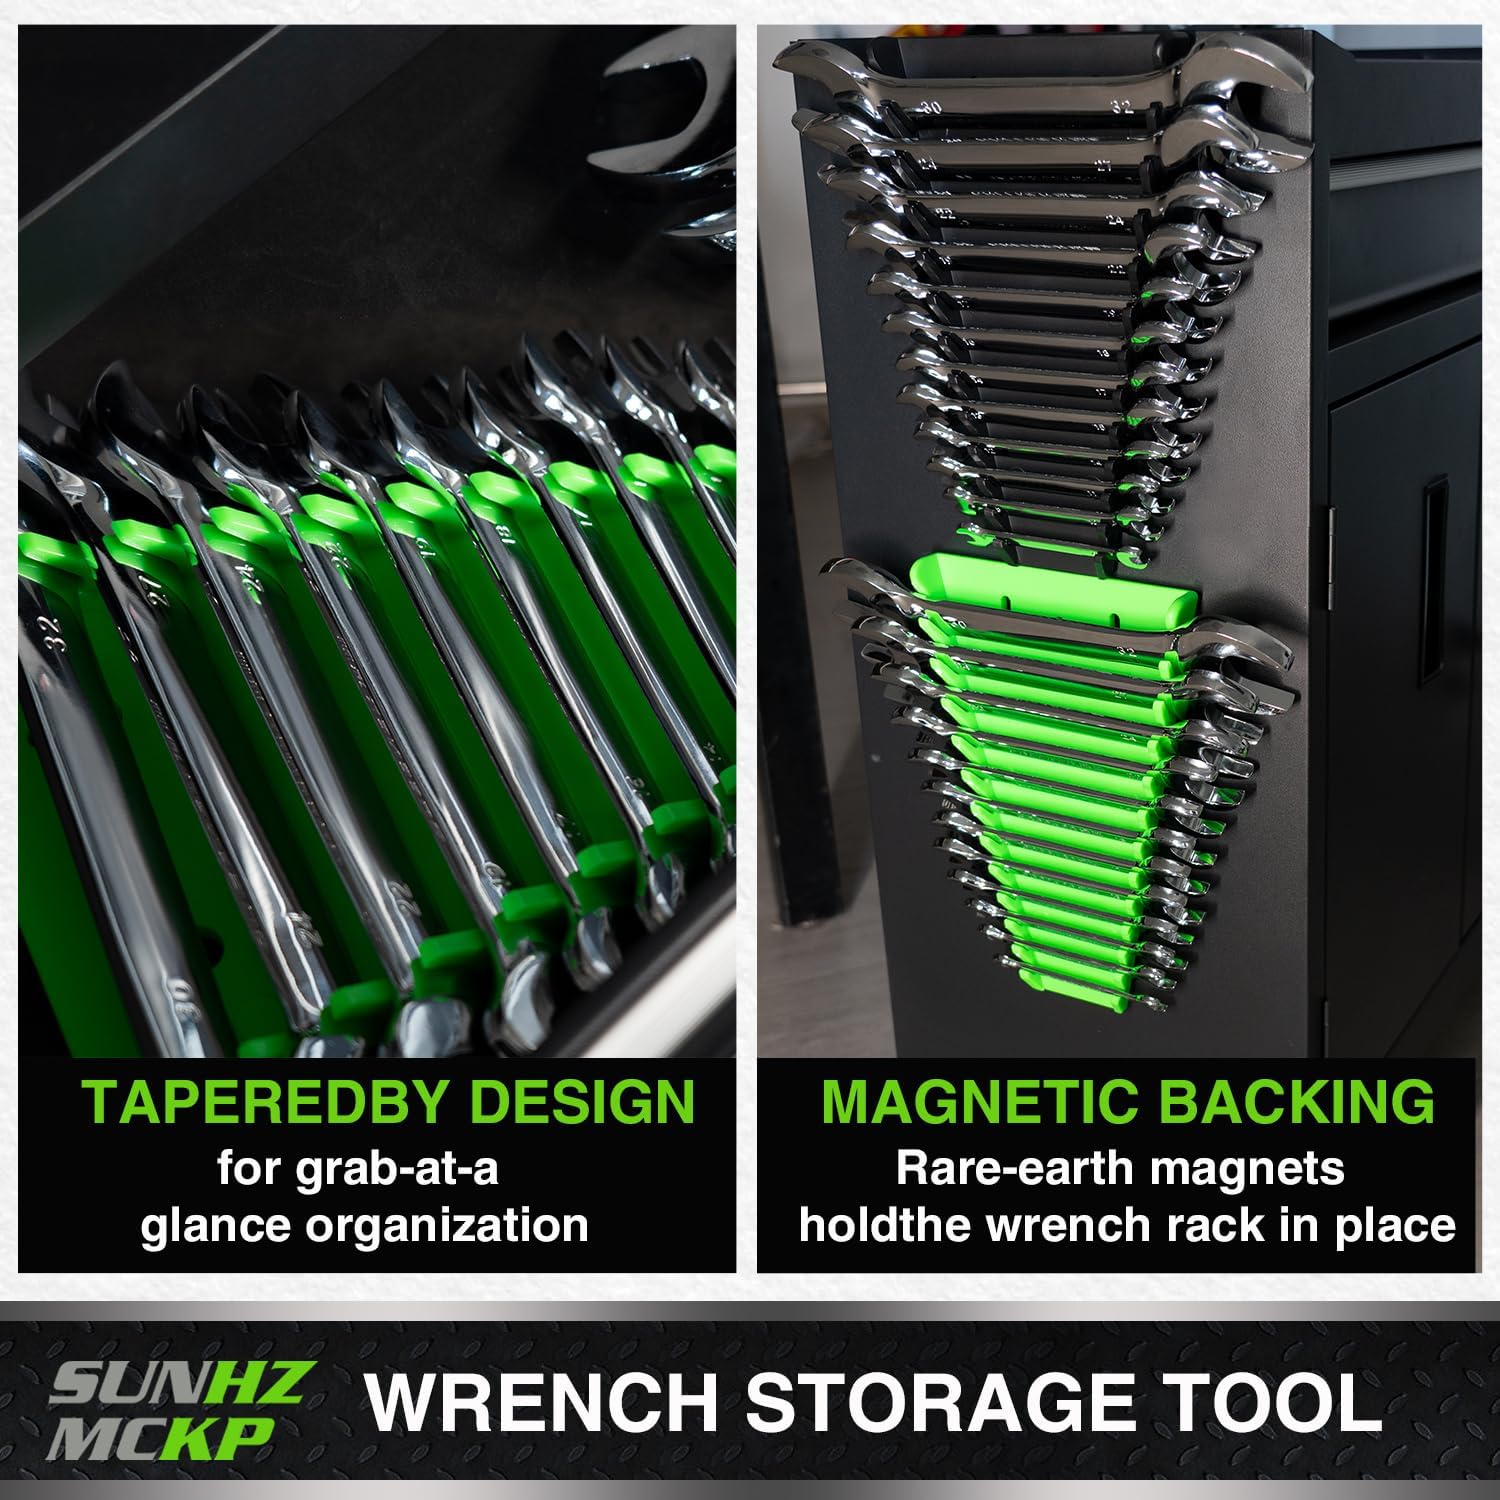 4 Pack Magnetic Wrench Rack Tool Trays Wrench Organizer for Toolboxes Holder up to 48 wrenches